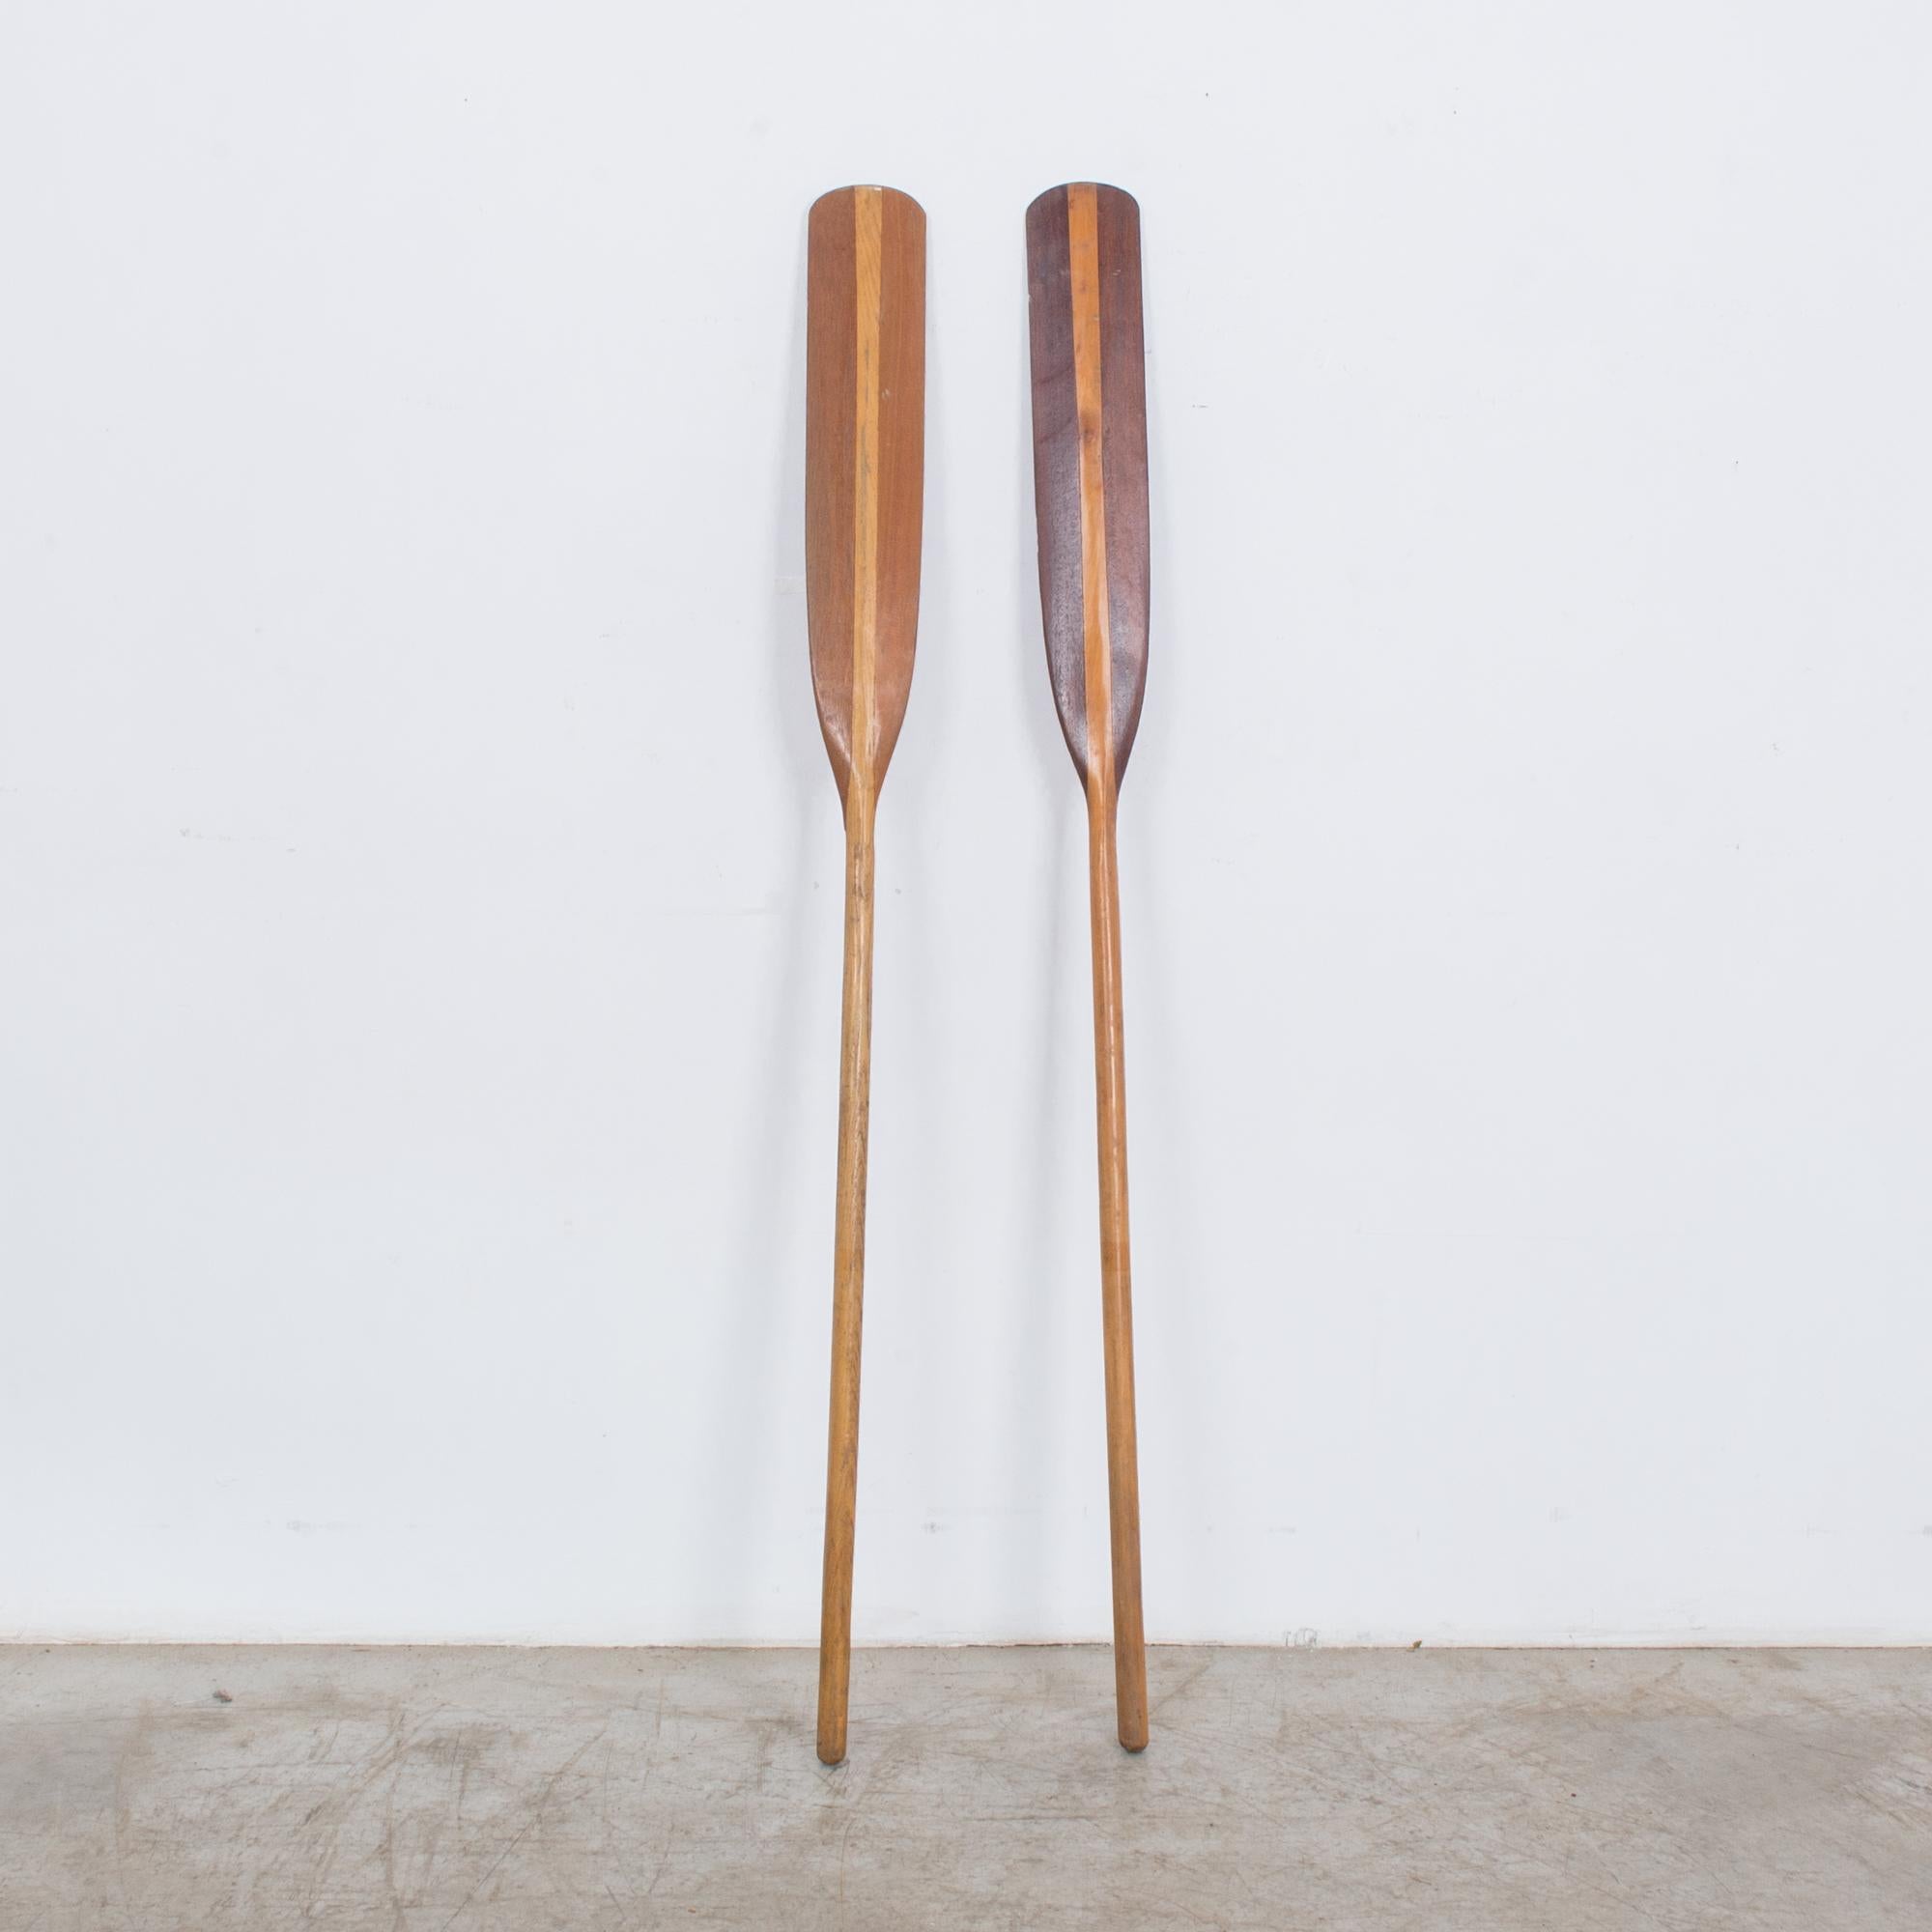 This pair of wooden boat oars was made in France, circa 1960.
The polished wood has a smooth finish with a dual-toned blade and a light brown shaft. Perfect for hanging on the wall, the oars will complete a beach house or impart the charm of an